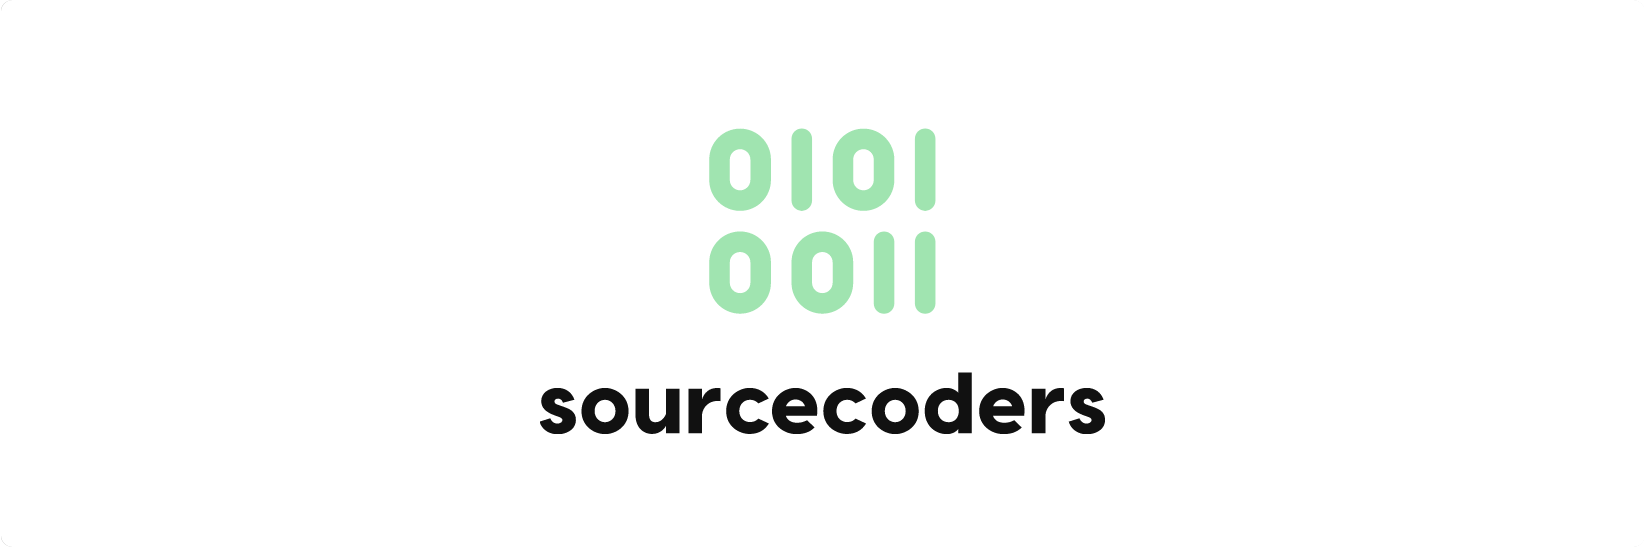 sourcecoders.png